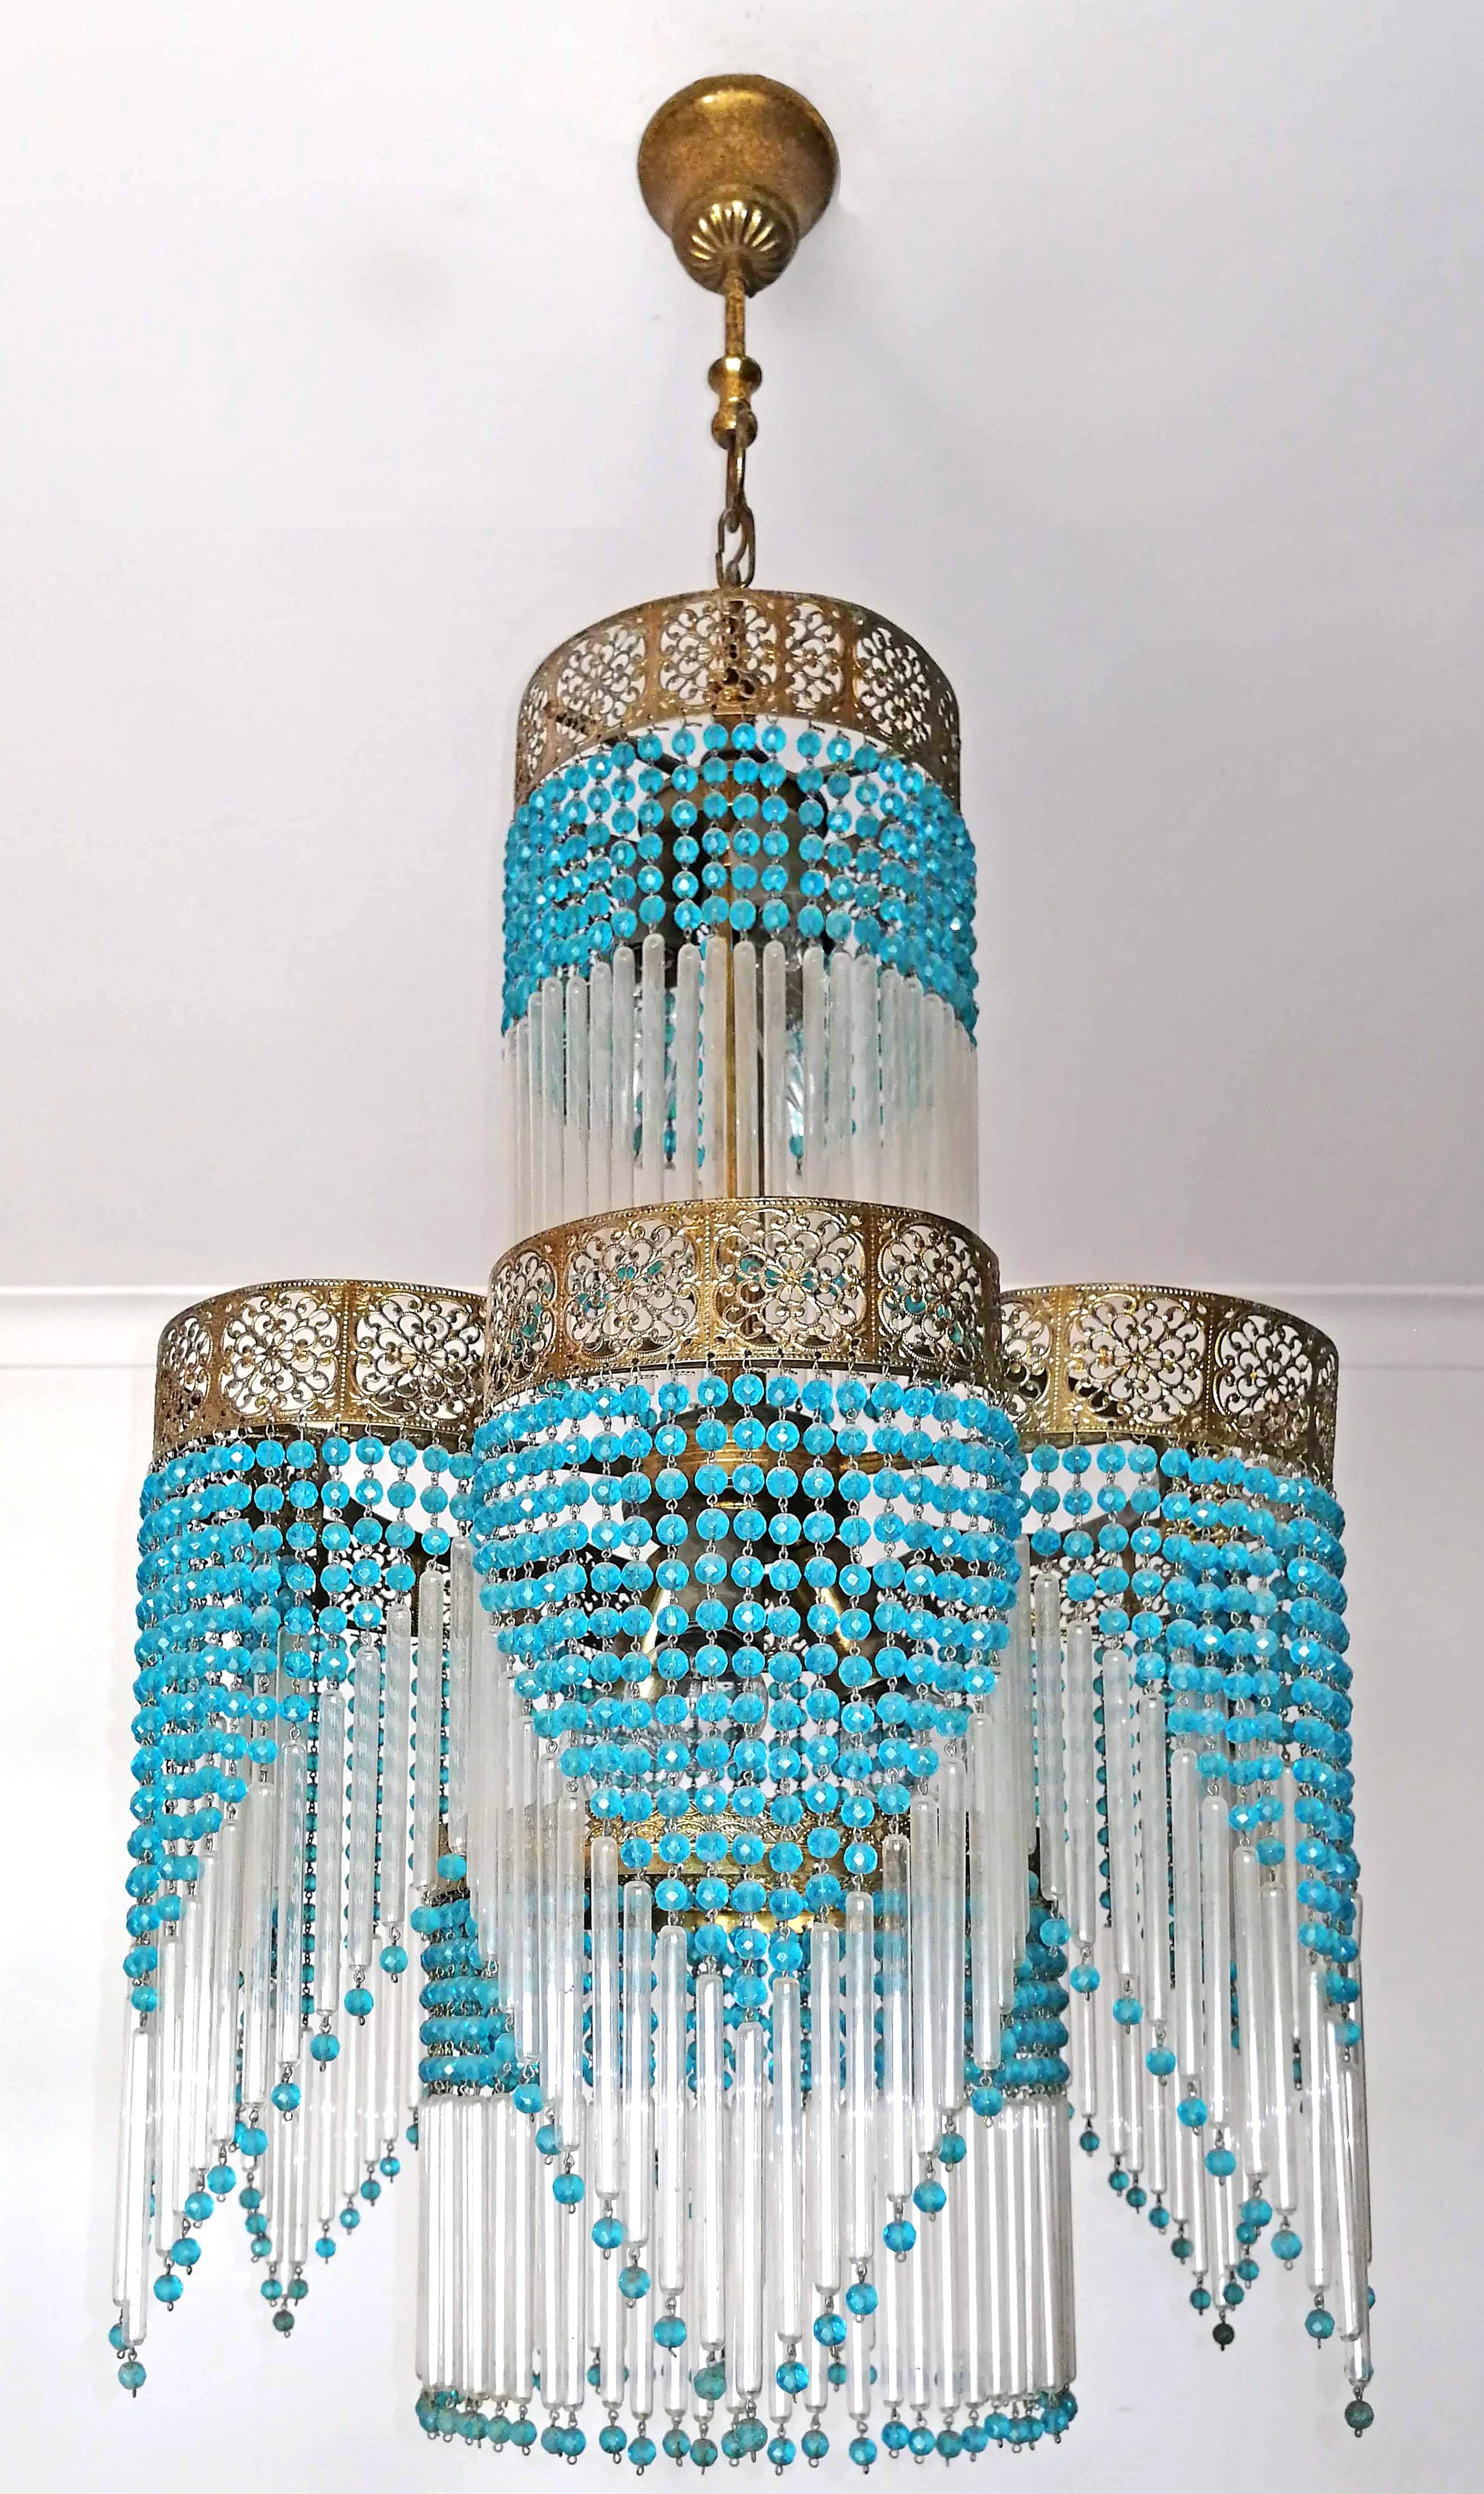 Fabulous French midcentury Art Deco/Art Nouveau chandelier in clear glass and blue beaded.
Measures: 
Diameter 15.8 in/40 cm
Height: 37.5 in /95 cm (8.6 in, 22 cm/chain).
6-light bulbs-E14/ Good working condition/European wiring.
Your item will